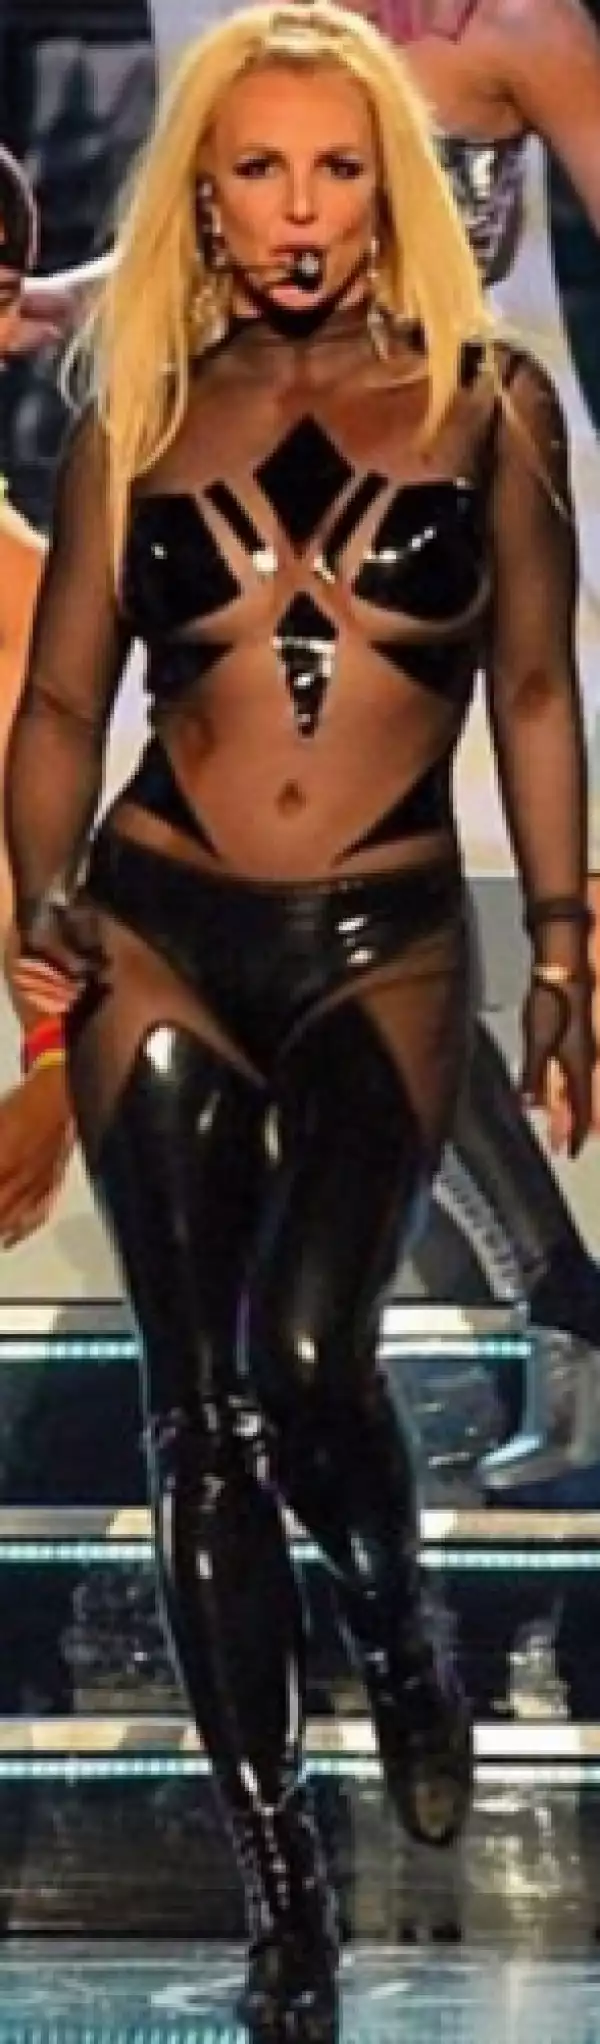 Britney Spears Outfit For Her Performance At Billboard Music Awards